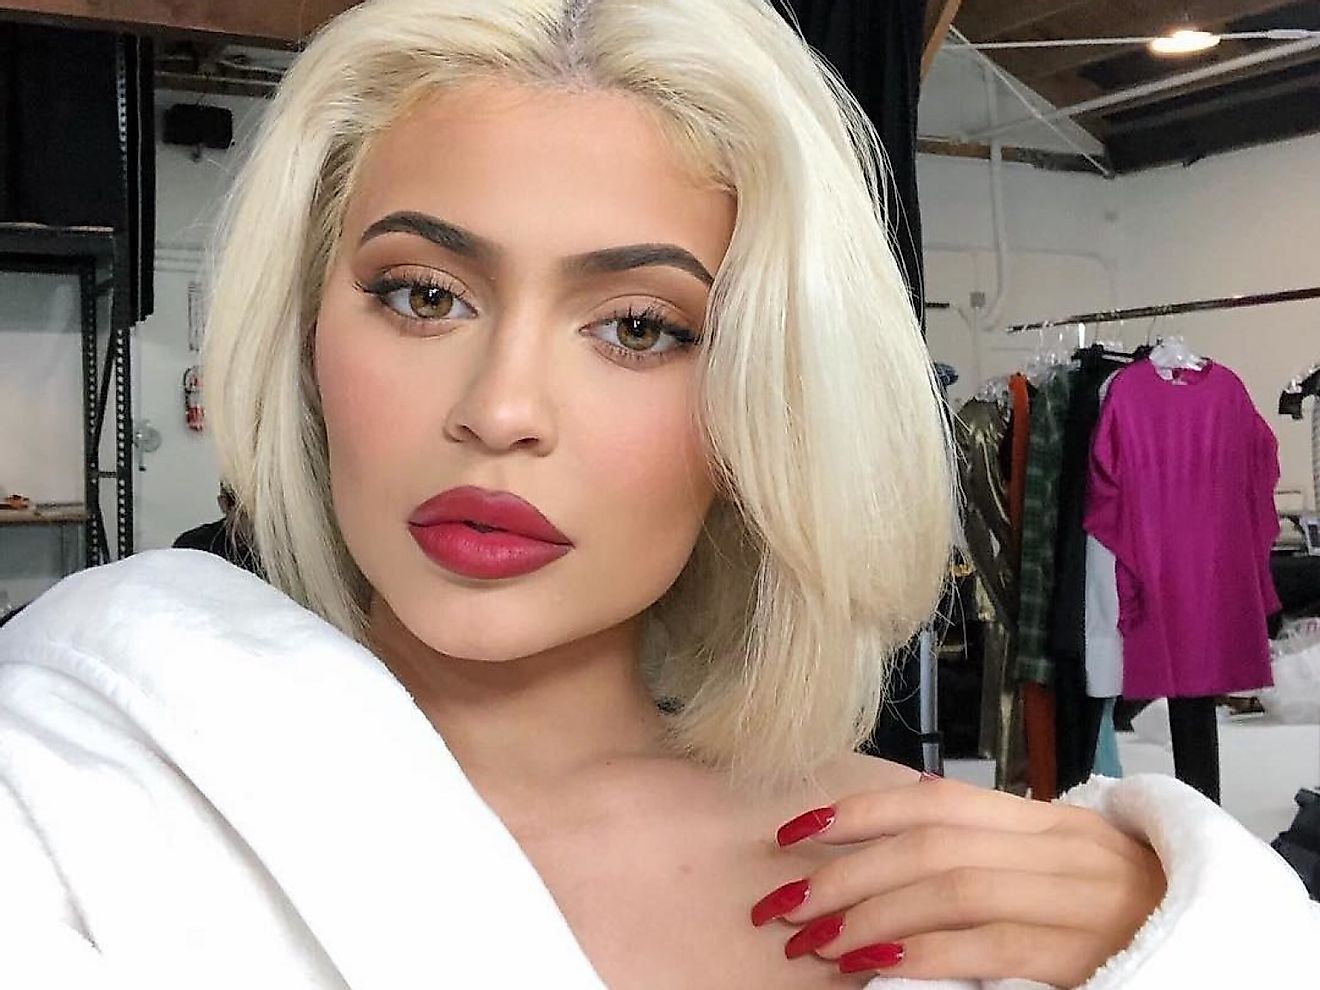 Kylie Jenner is the world's youngest Billionaire at the age of 23